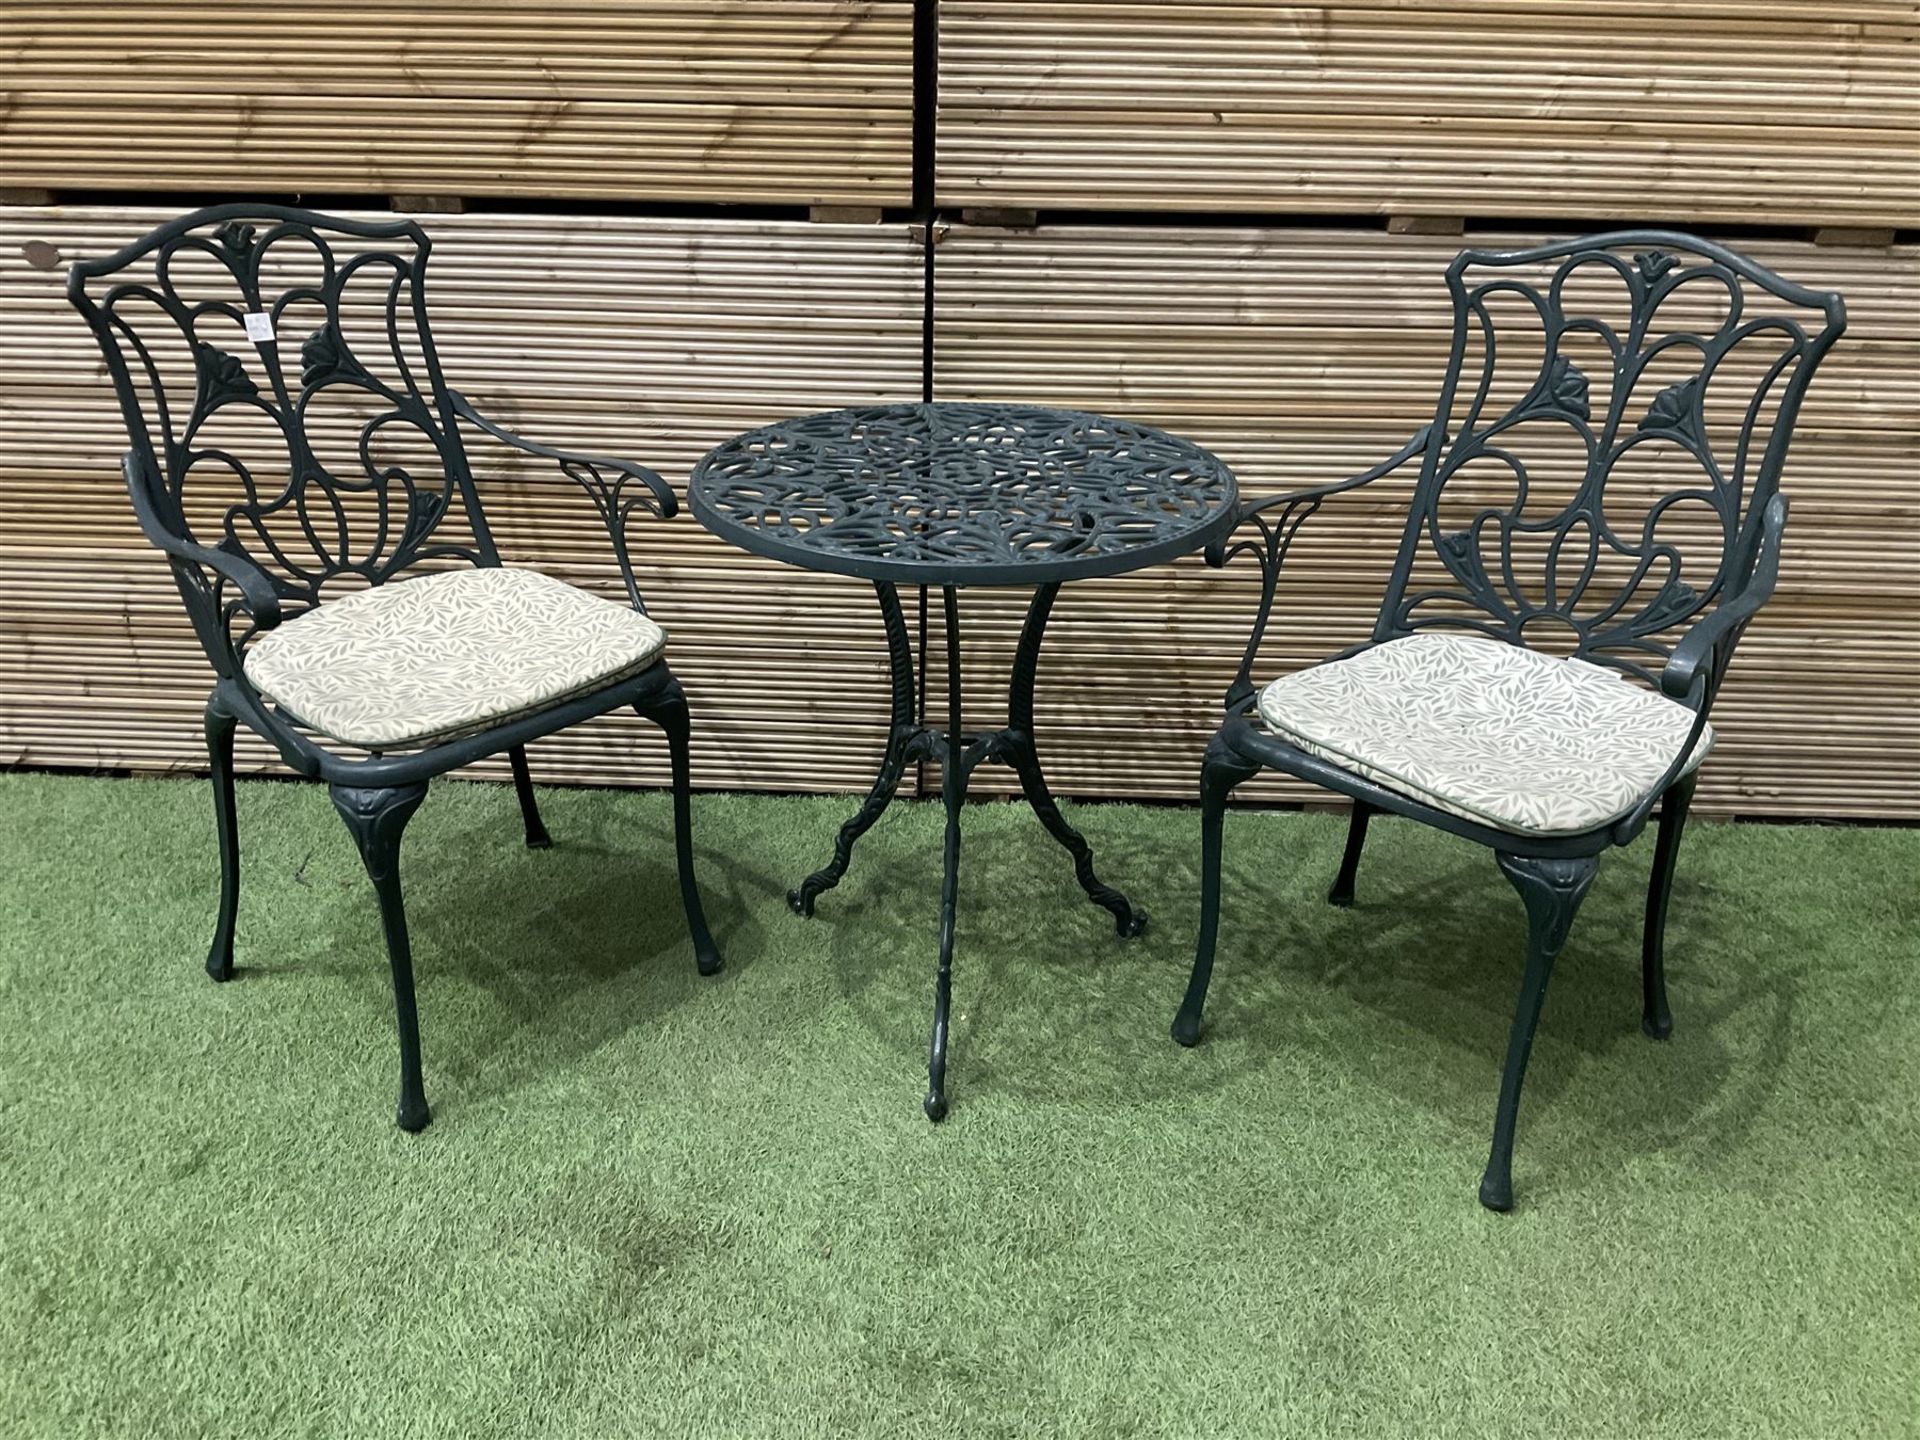 Aluminium garden table and two chairs painted in green